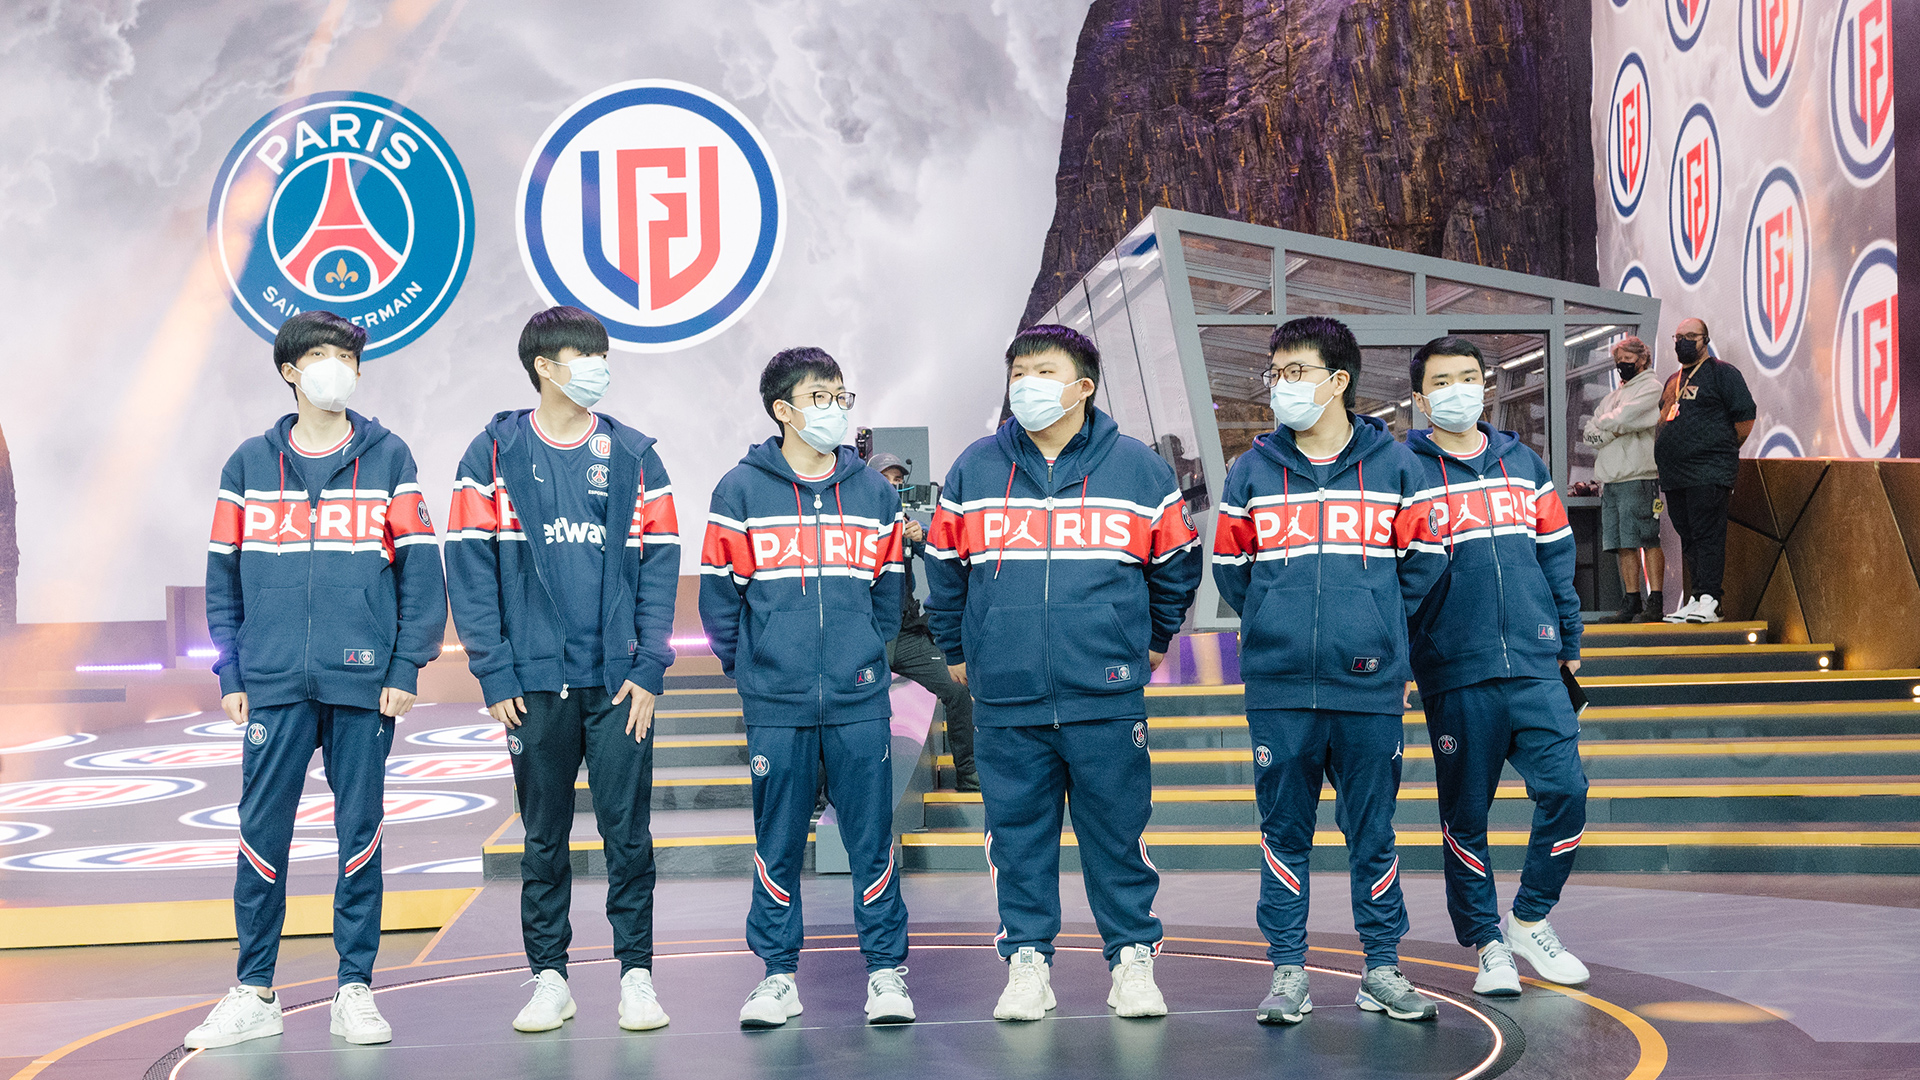 PSG.LGD's Dota 2 team will stay together for 2022 DPC season after TI10 run  | ONE Esports